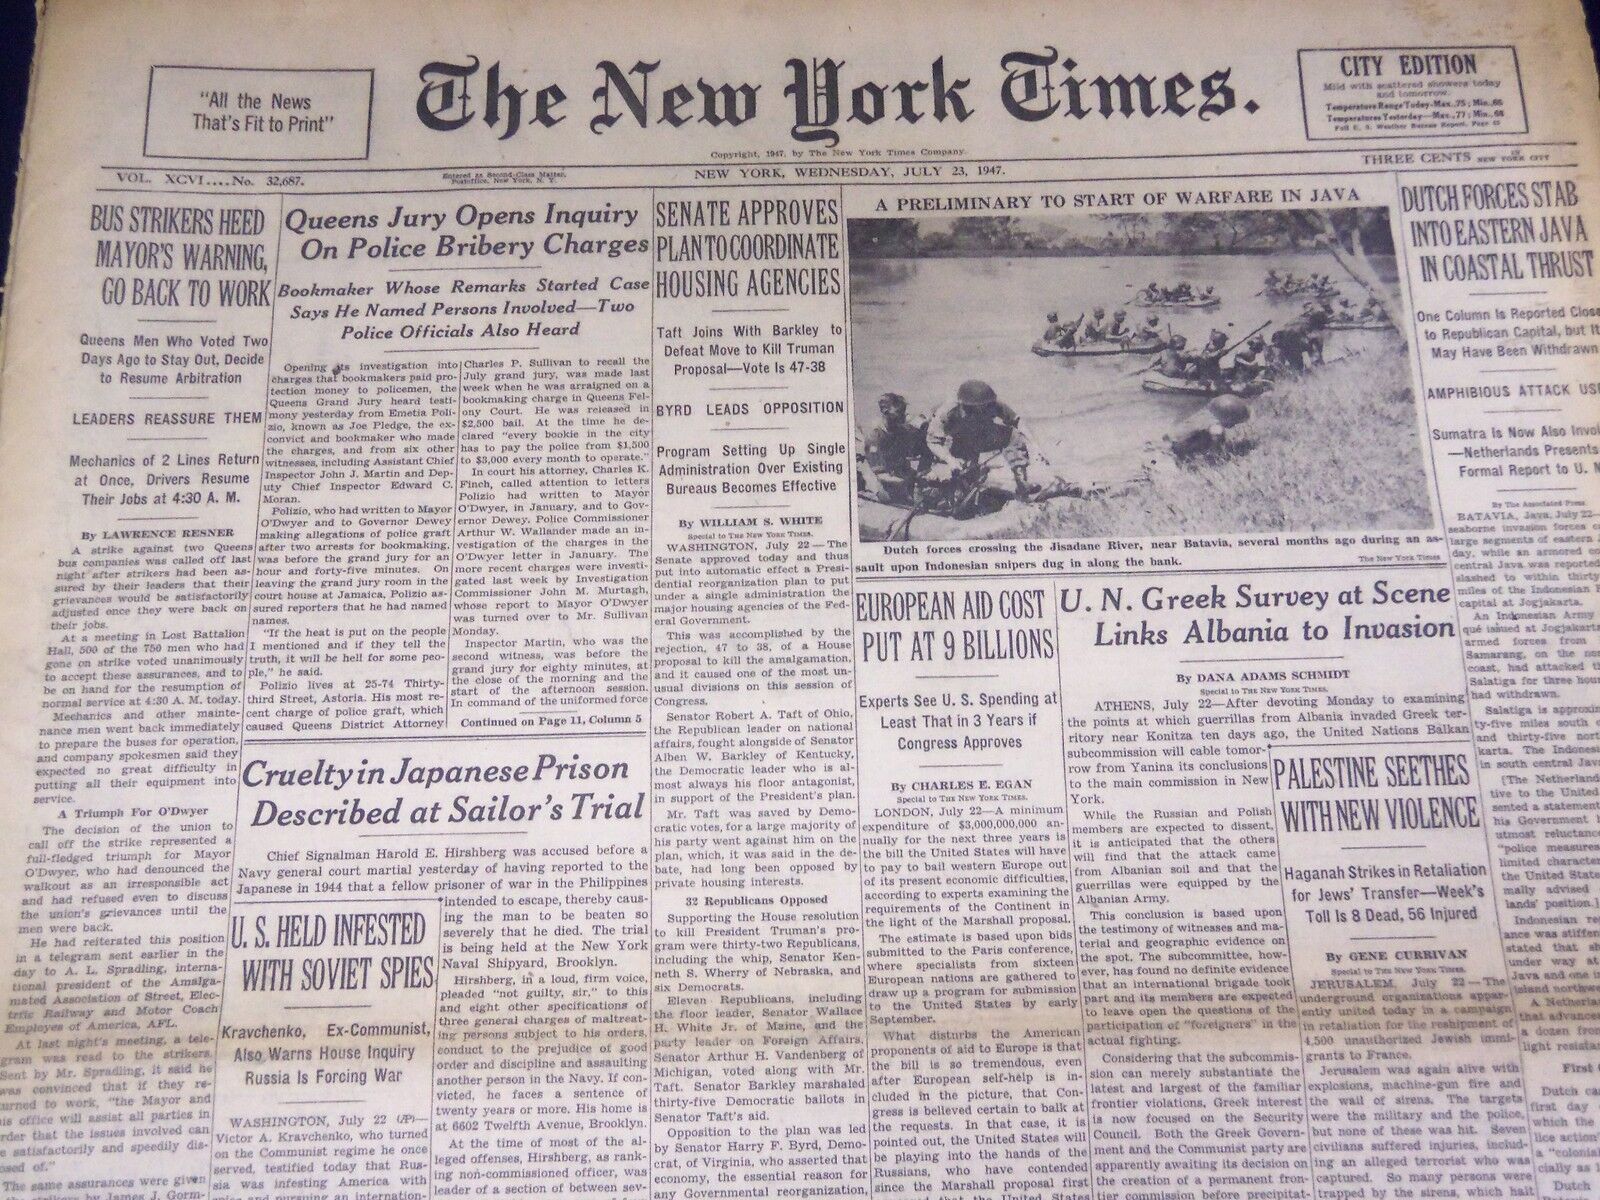 1947 JUNE 23 NEW YORK TIMES - POLICE BRIBERY CHARGES INQUIRY - NT 3494